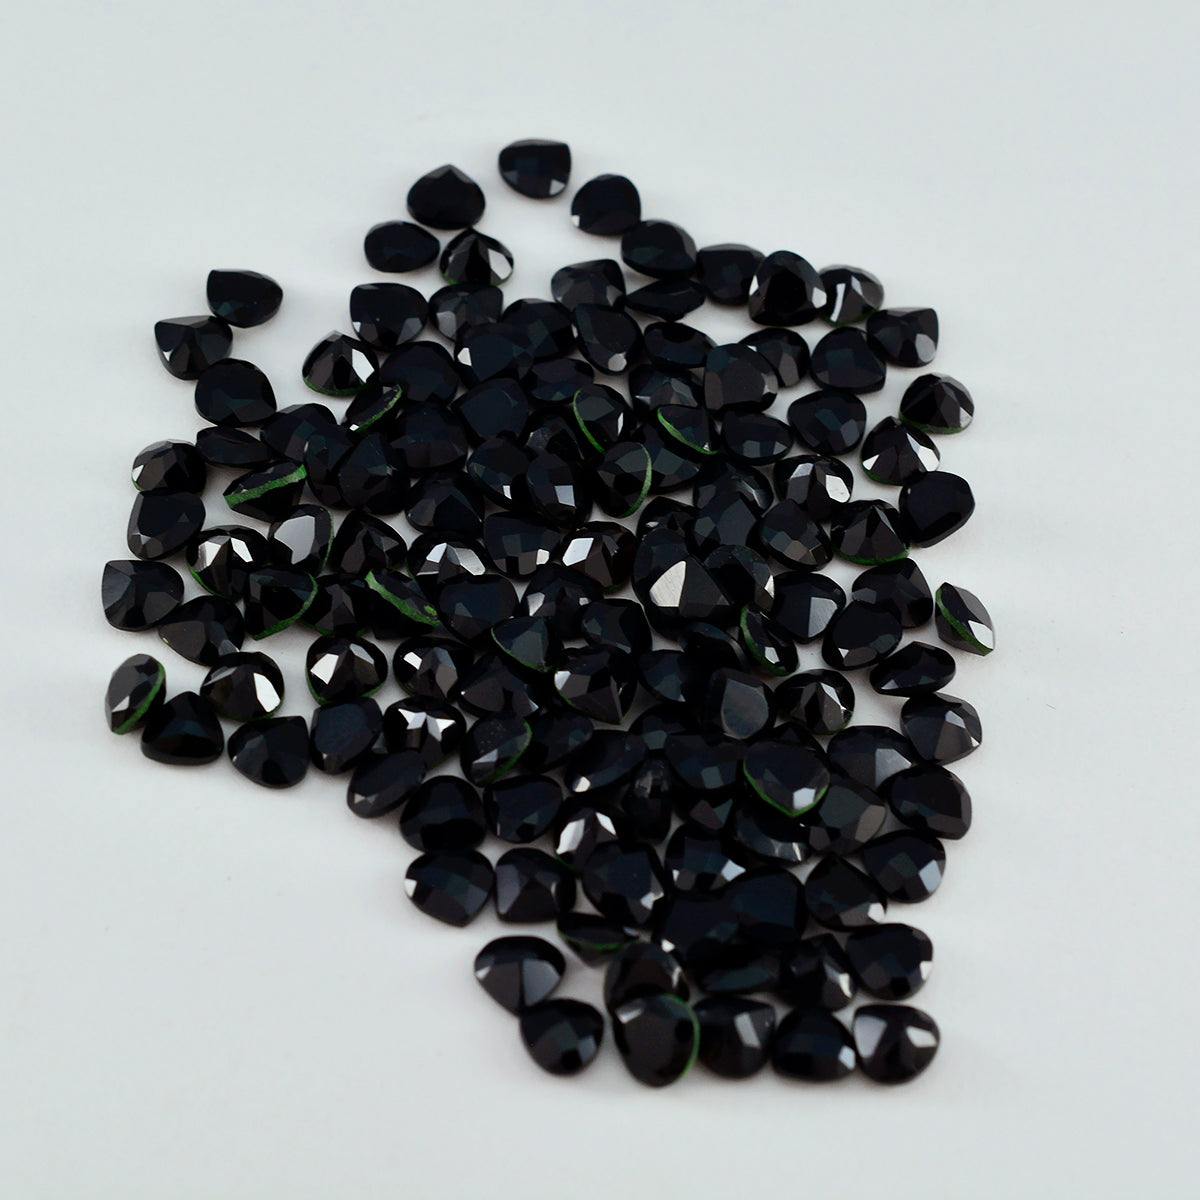 Riyogems 1PC Real Black Onyx Faceted 4x4 mm Heart Shape awesome Quality Loose Stone